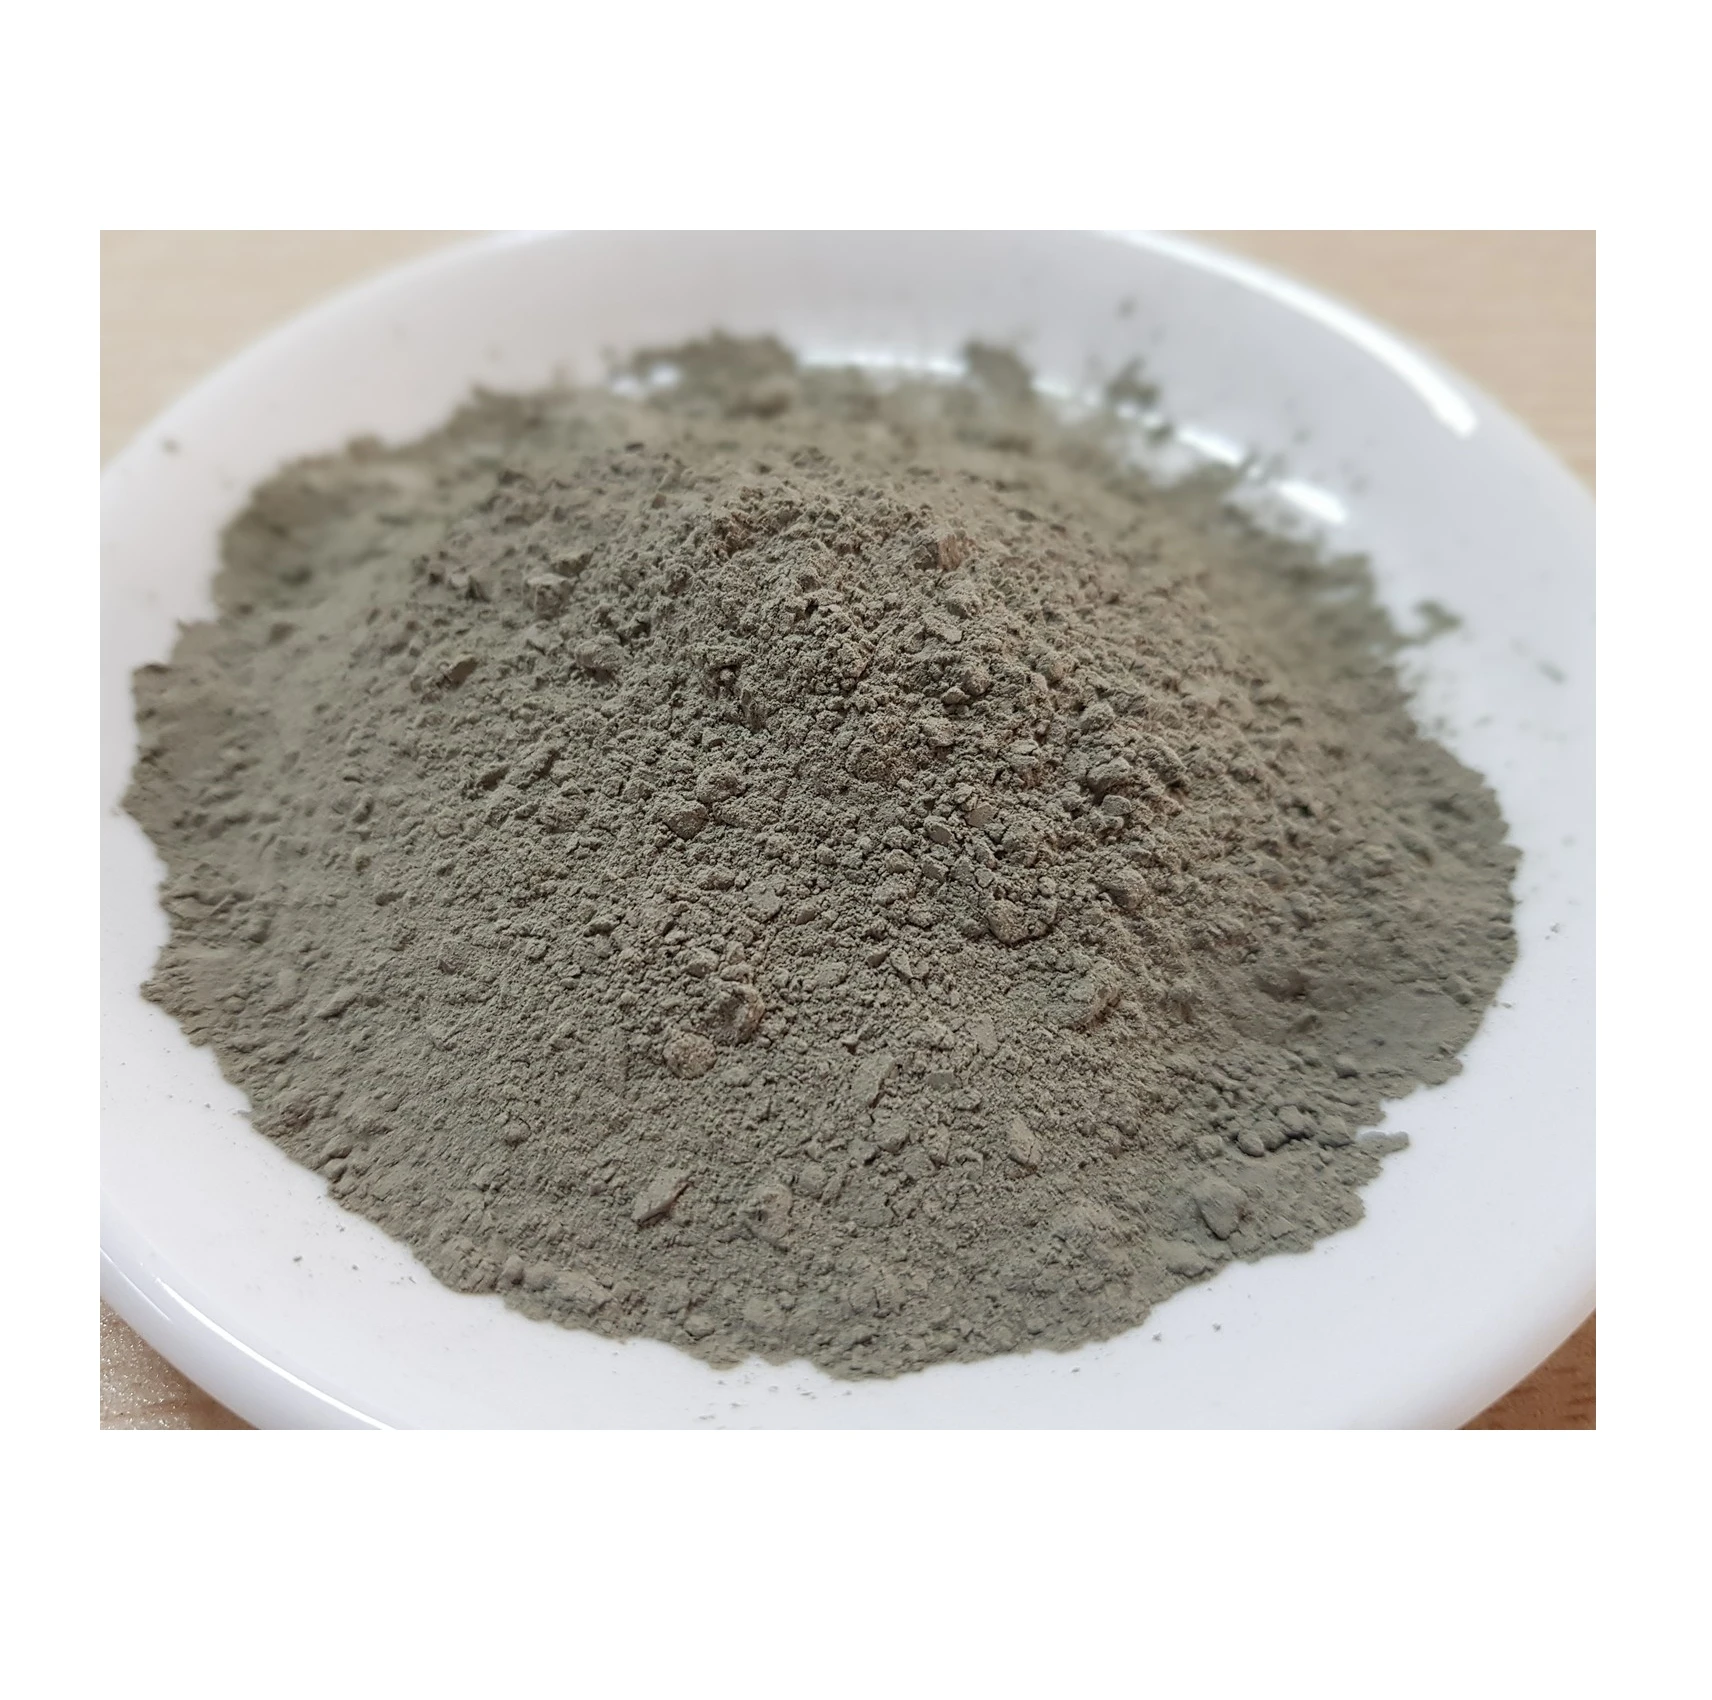 ansvar arbejde Nysgerrighed Hot Sale 2022 European Quality Blended Cement,Cement Type Ip From Vietnam  Best Supplier At Competitive Price - Buy Portland Cement,Blended Cement  Vietnam Cement,Blended Cement Type Ip Packing In Bag From Vietnam As